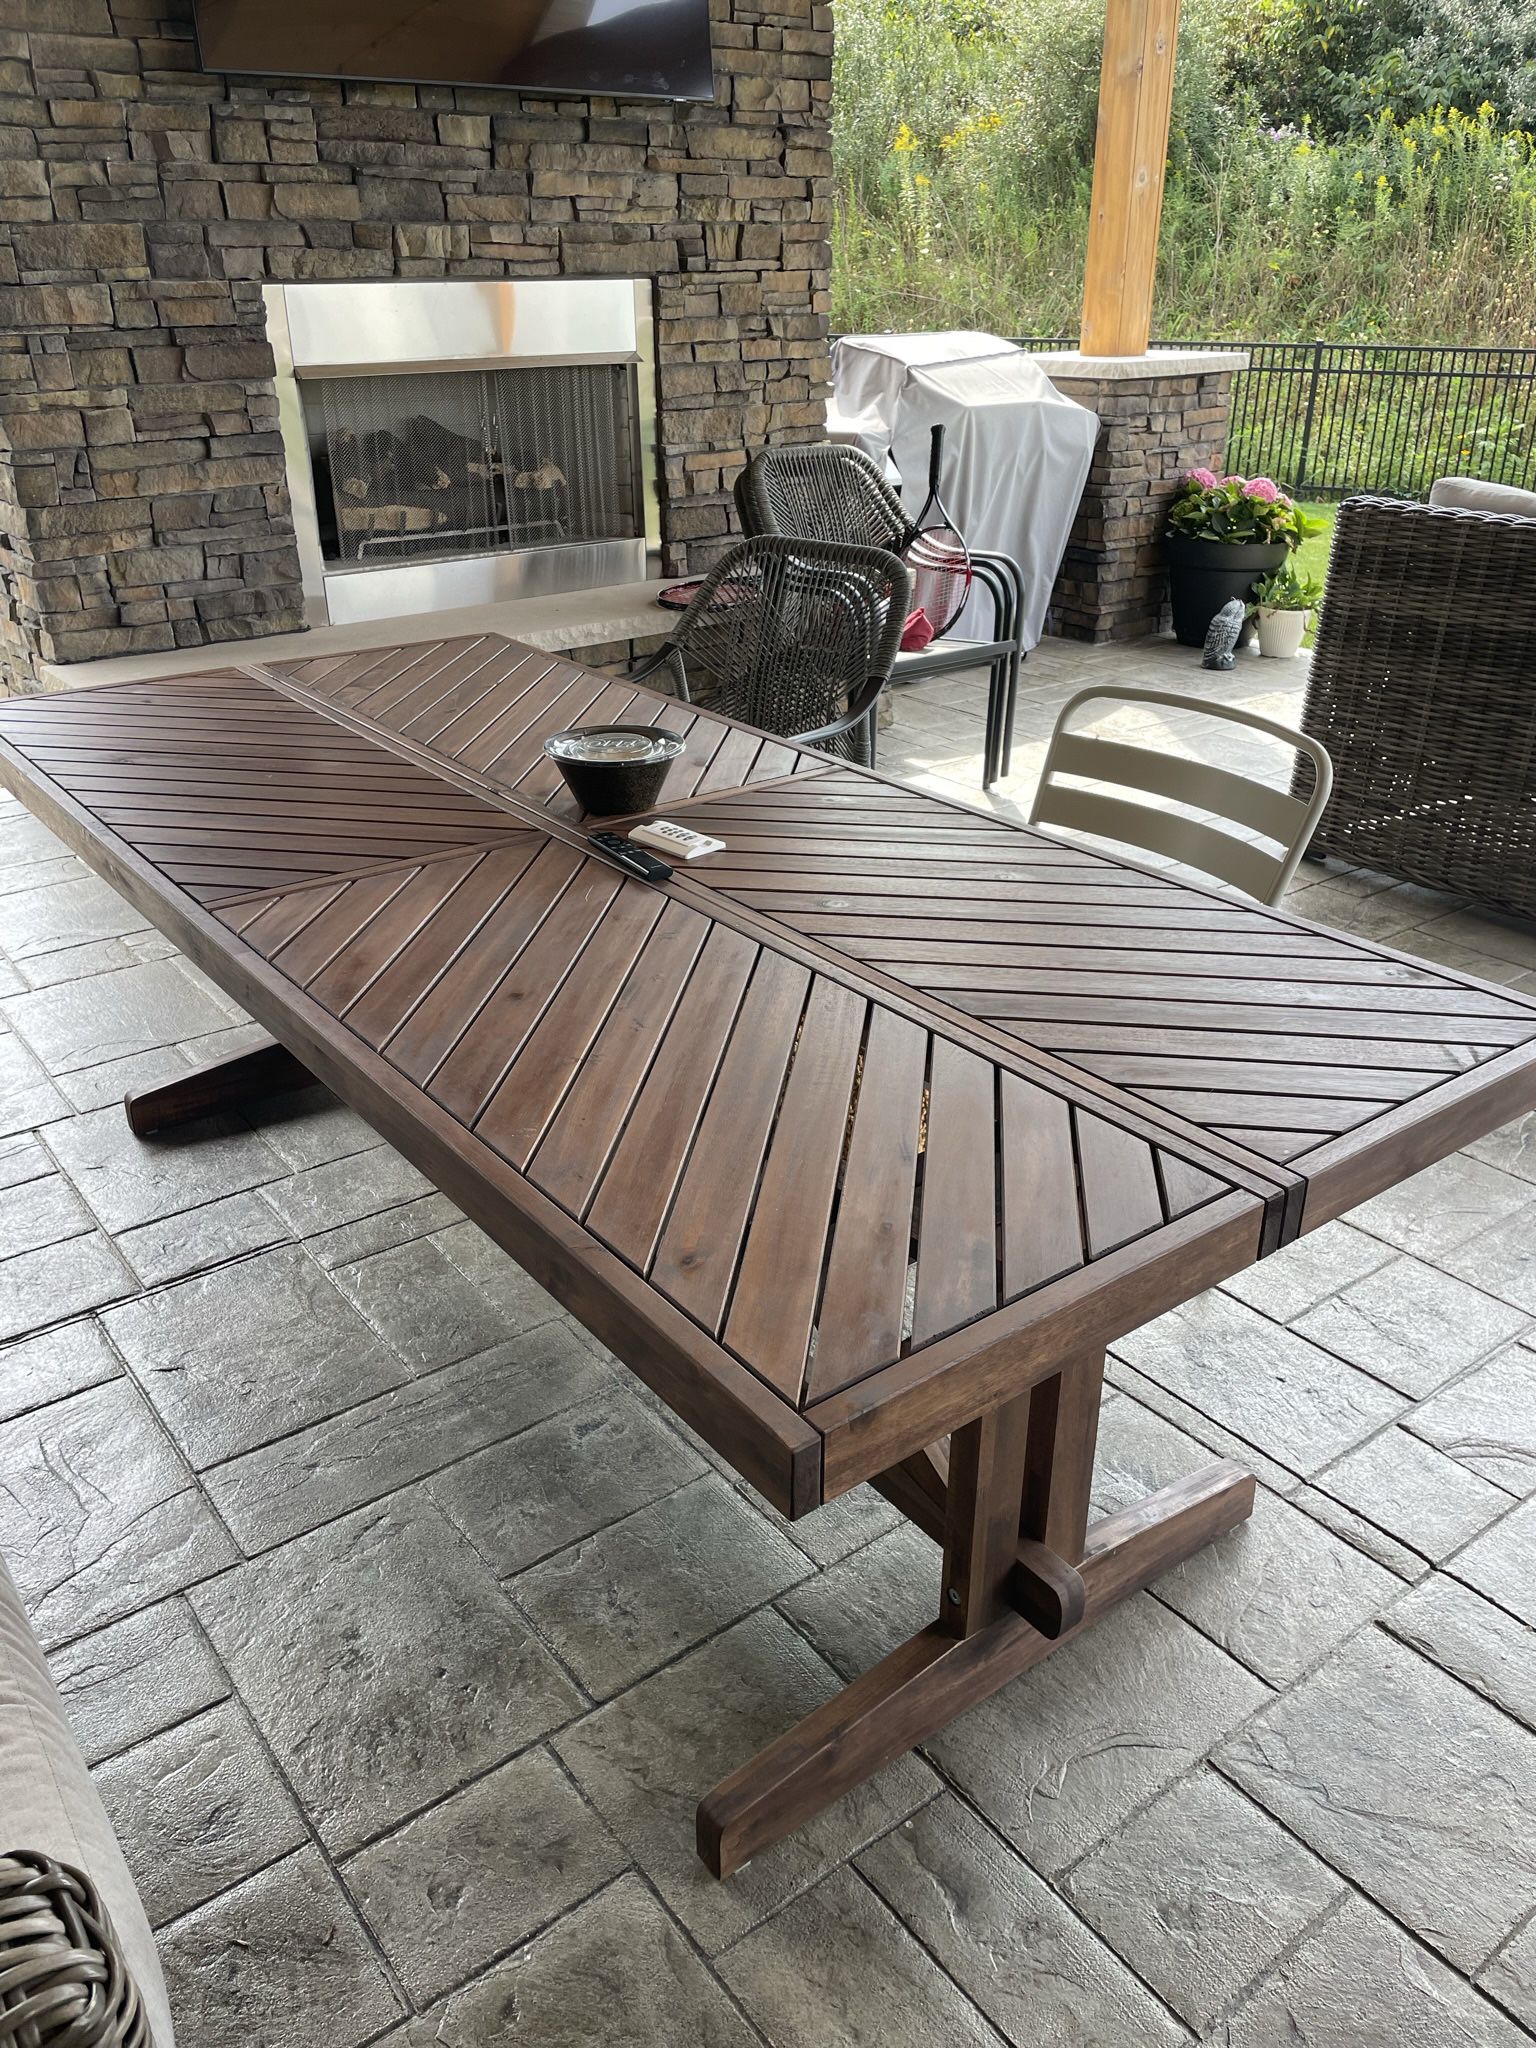 Brand New Norrmanso Patio Table